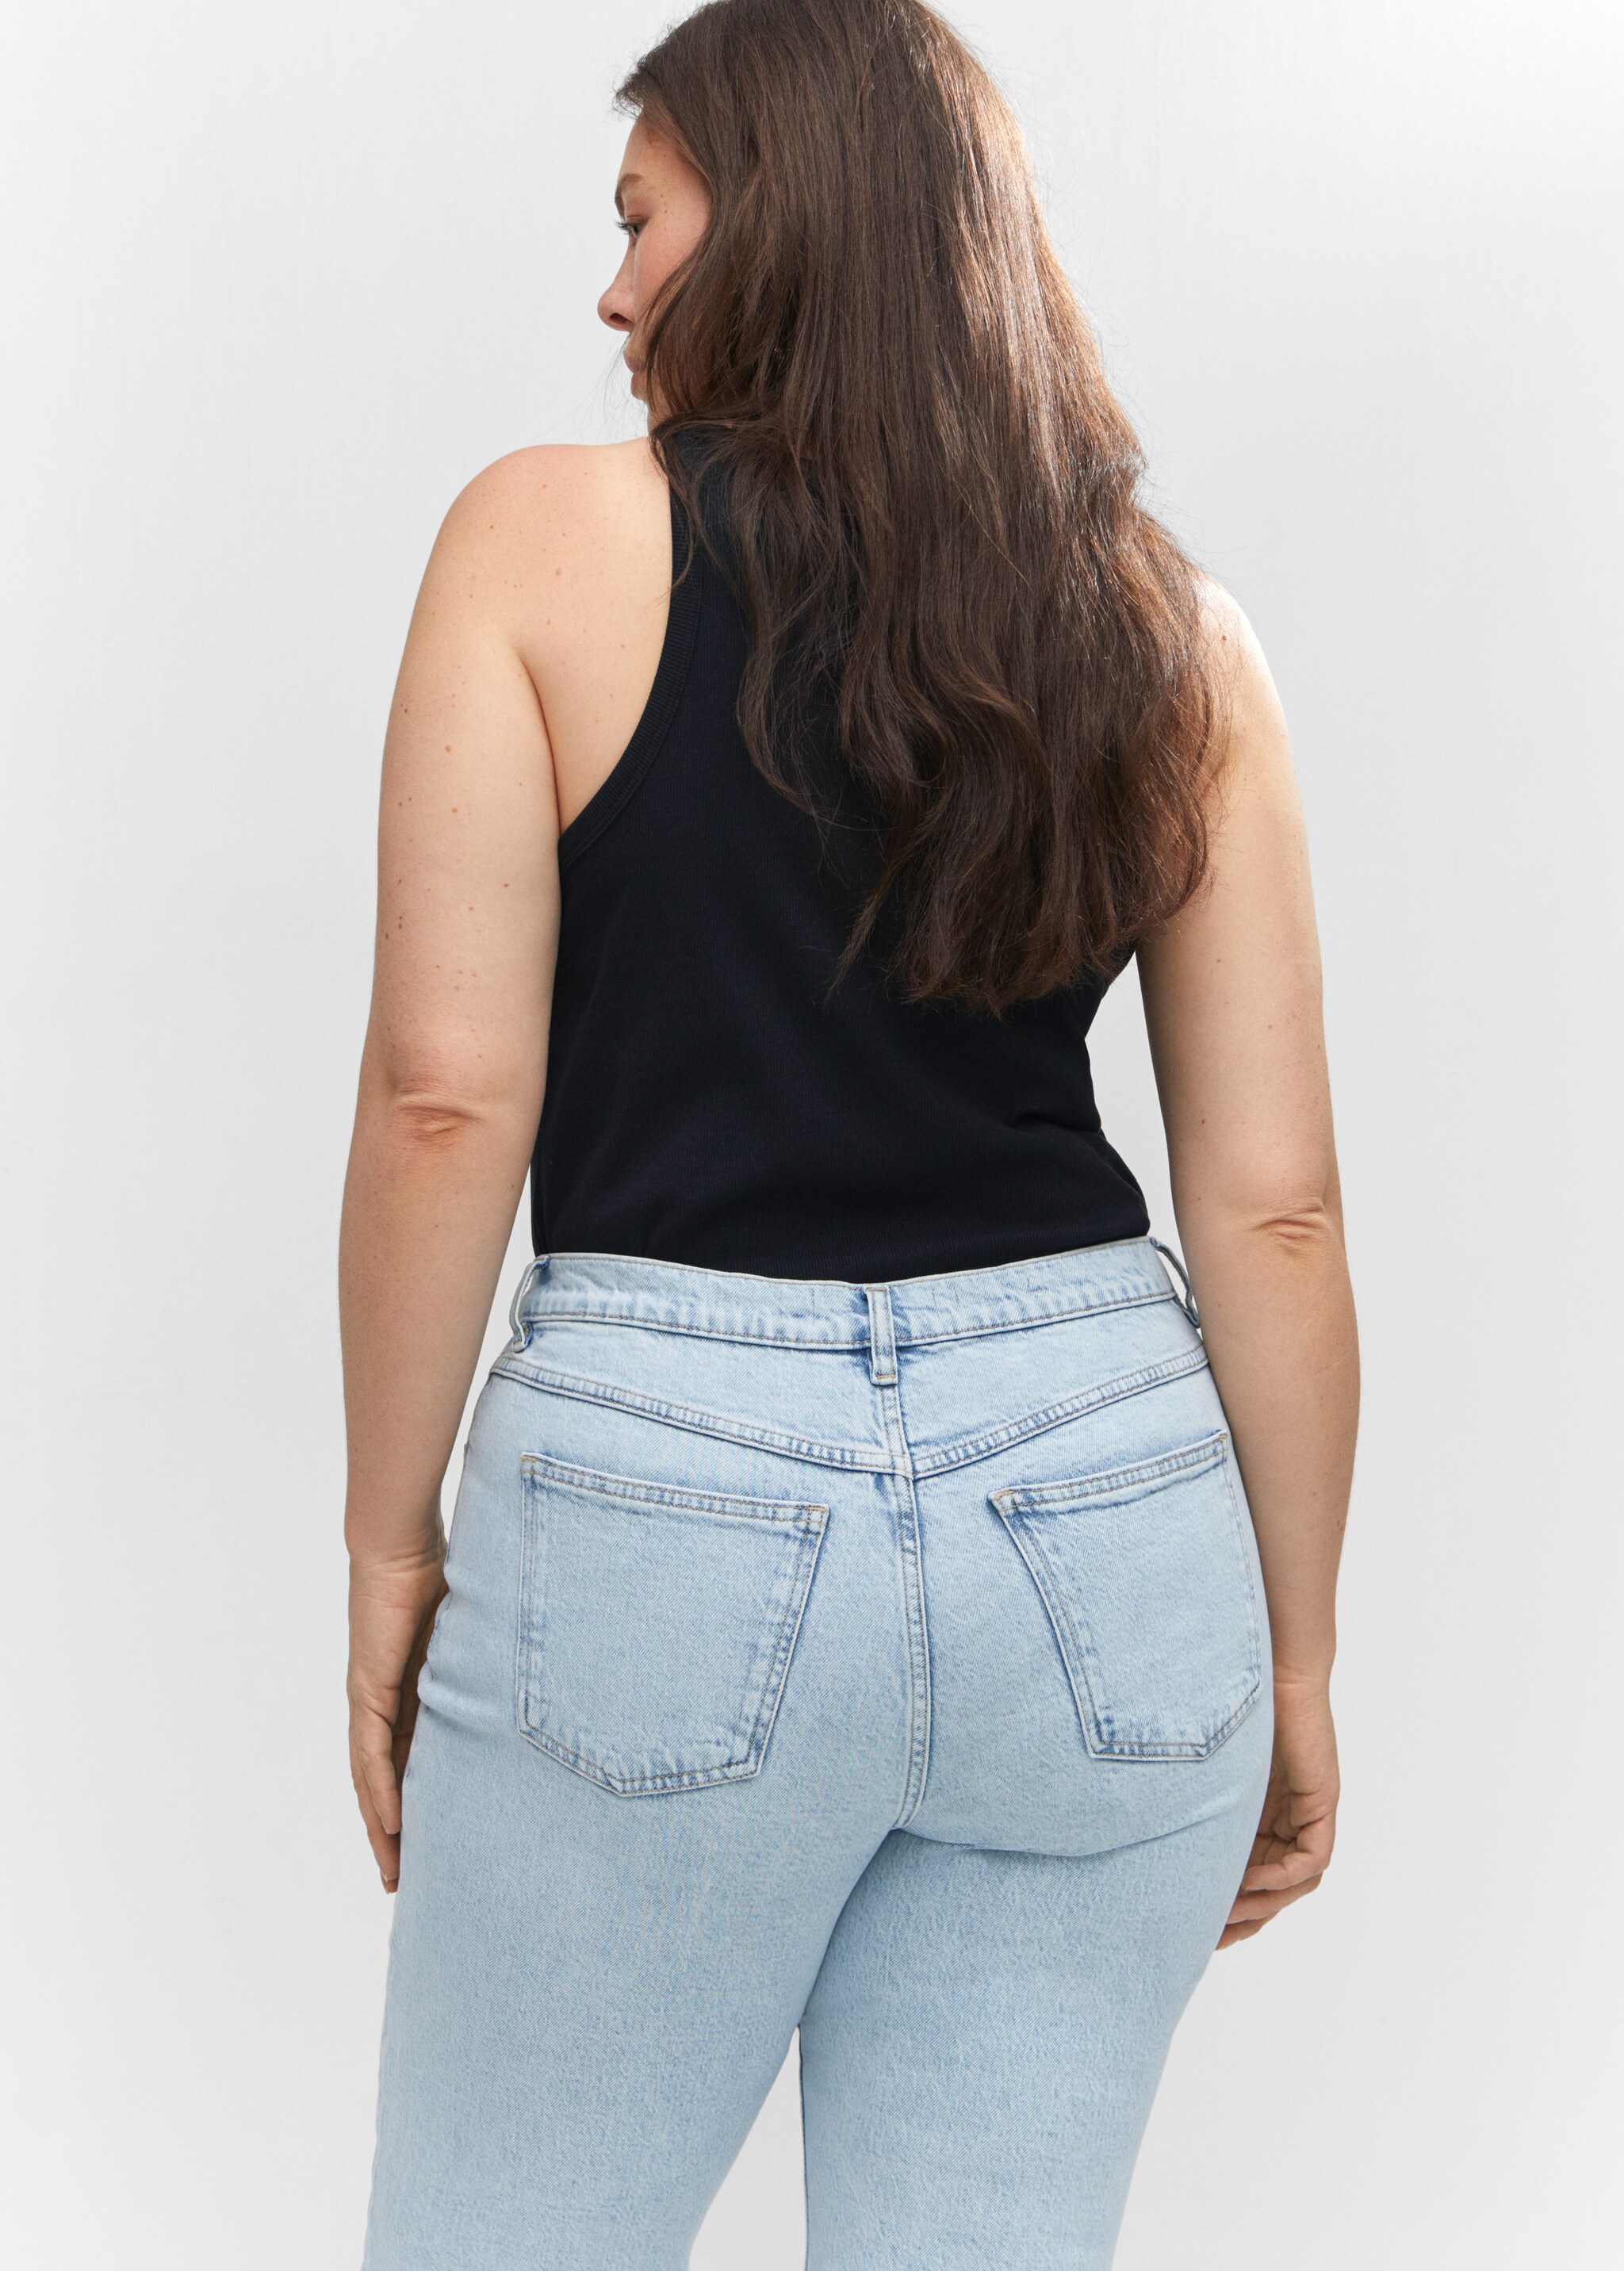 Jeans Newmom comfort high rise - Details of the article 4